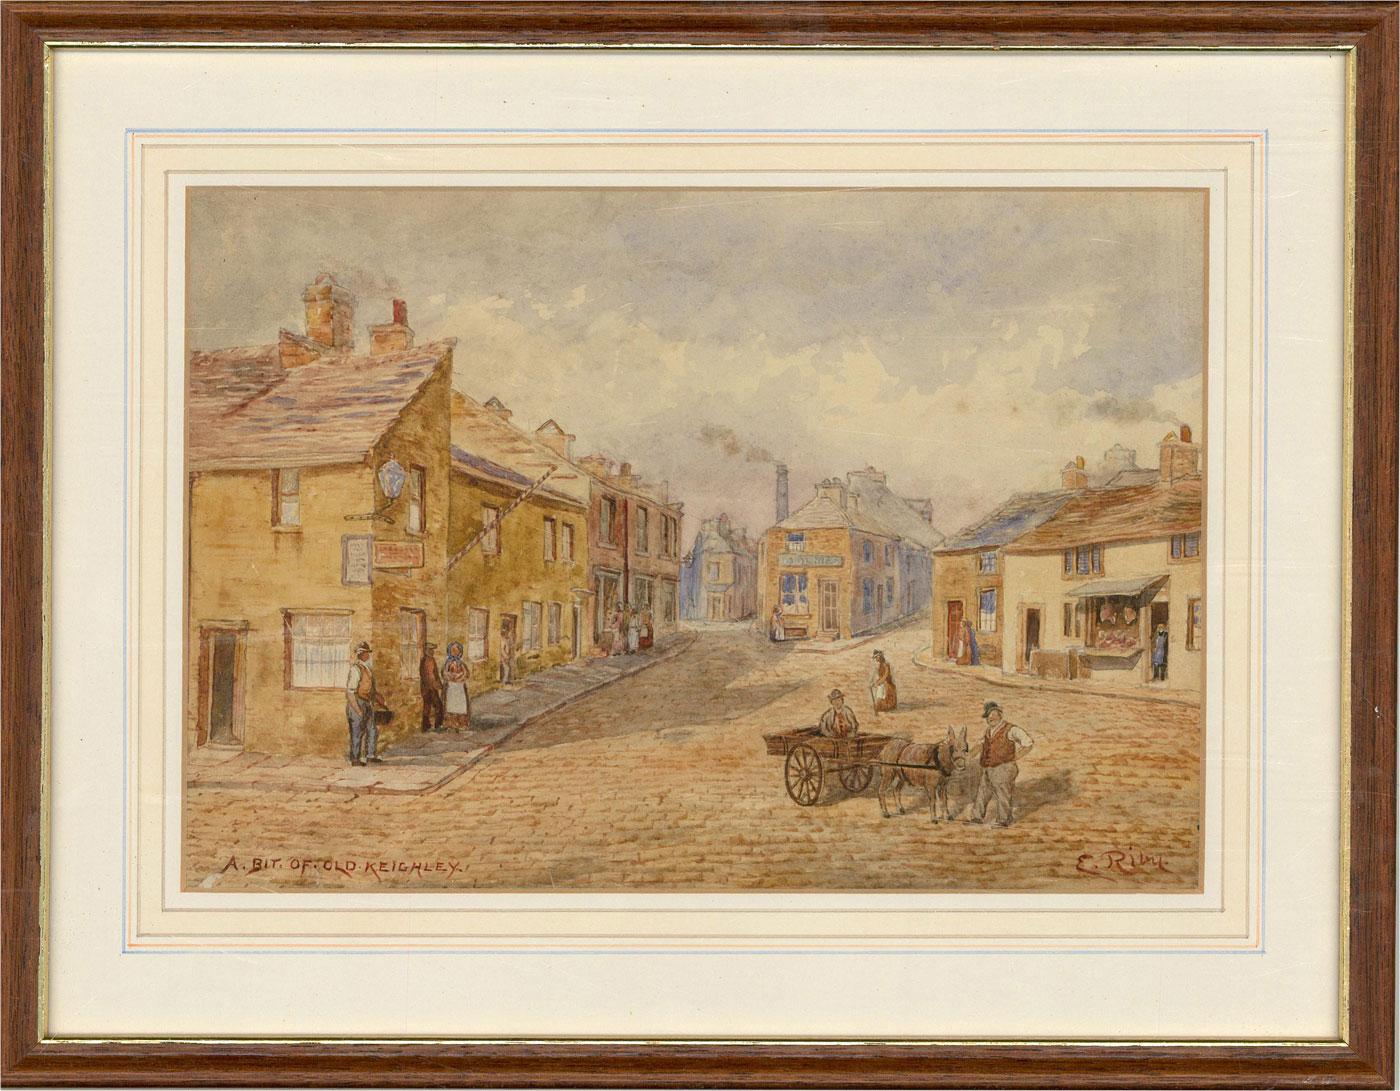 Unknown Landscape Art - Edwin Riby (1866-1927) Late 19th Century Watercolour - A Bit Of Old Keighley